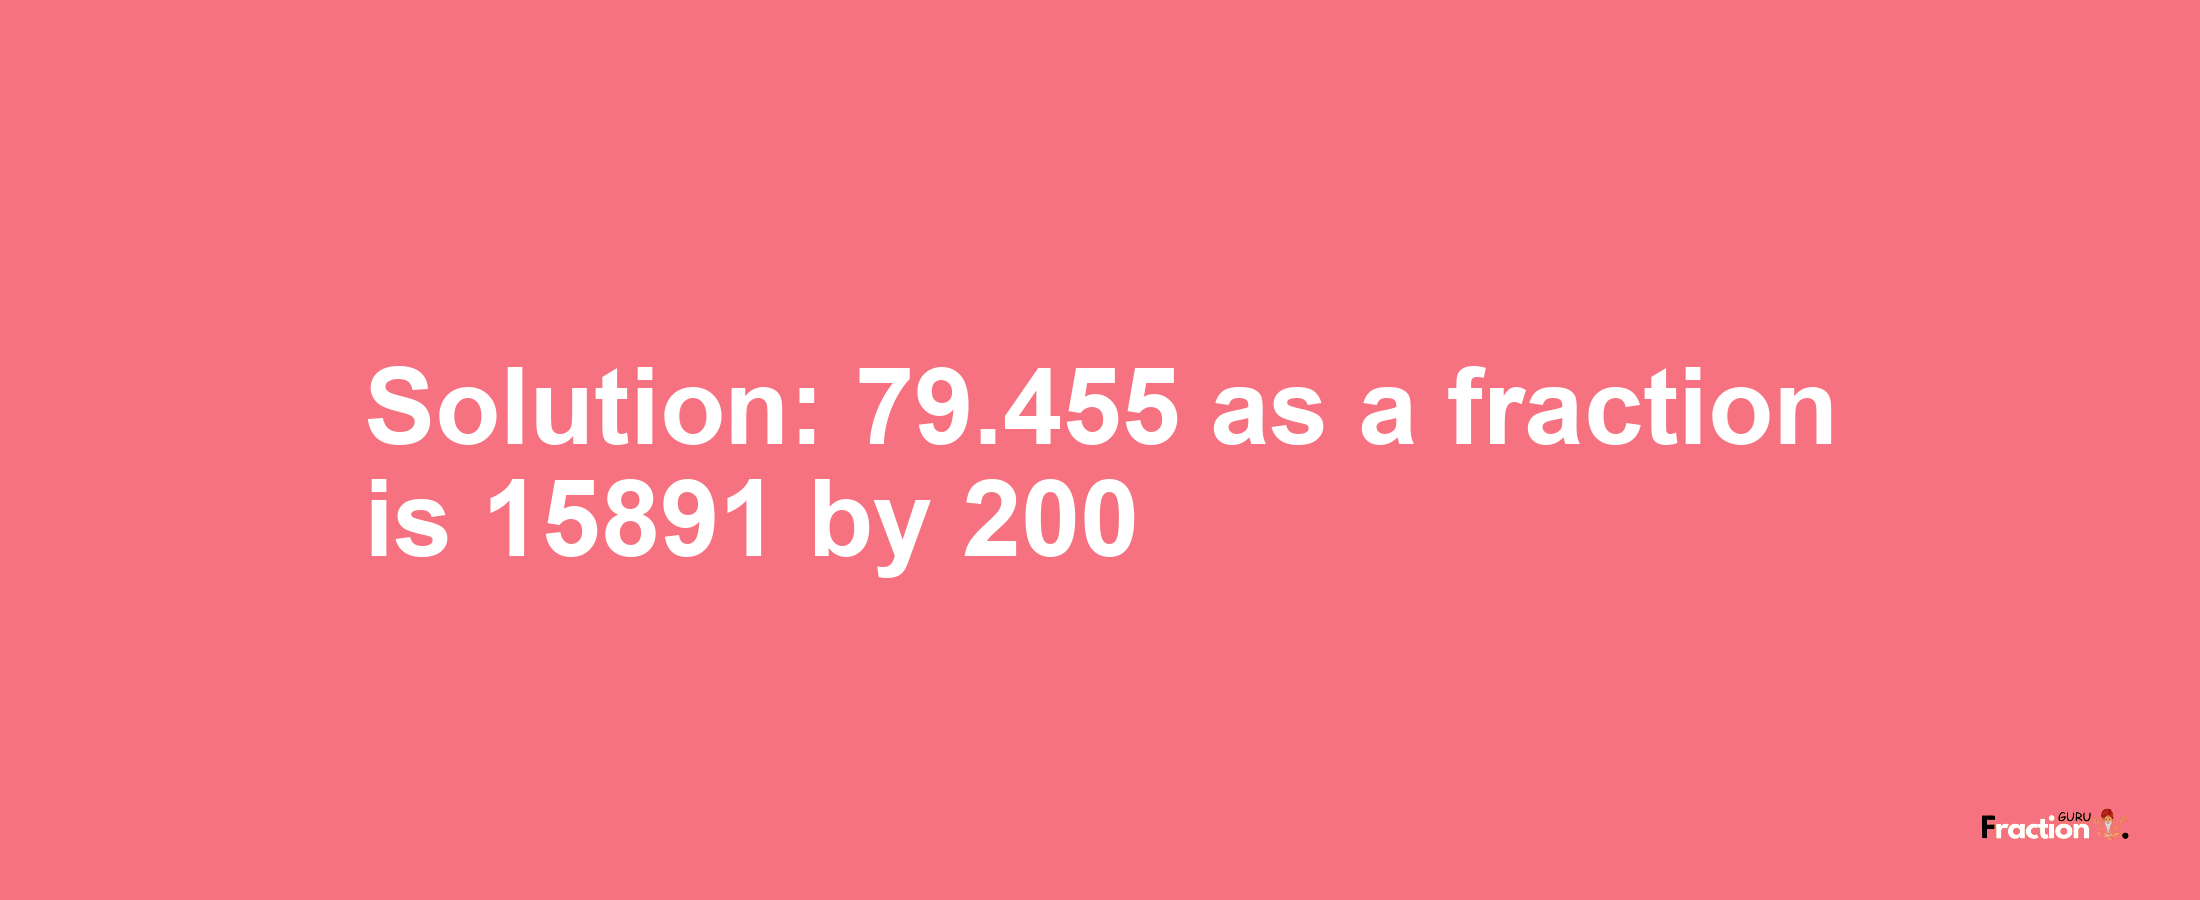 Solution:79.455 as a fraction is 15891/200